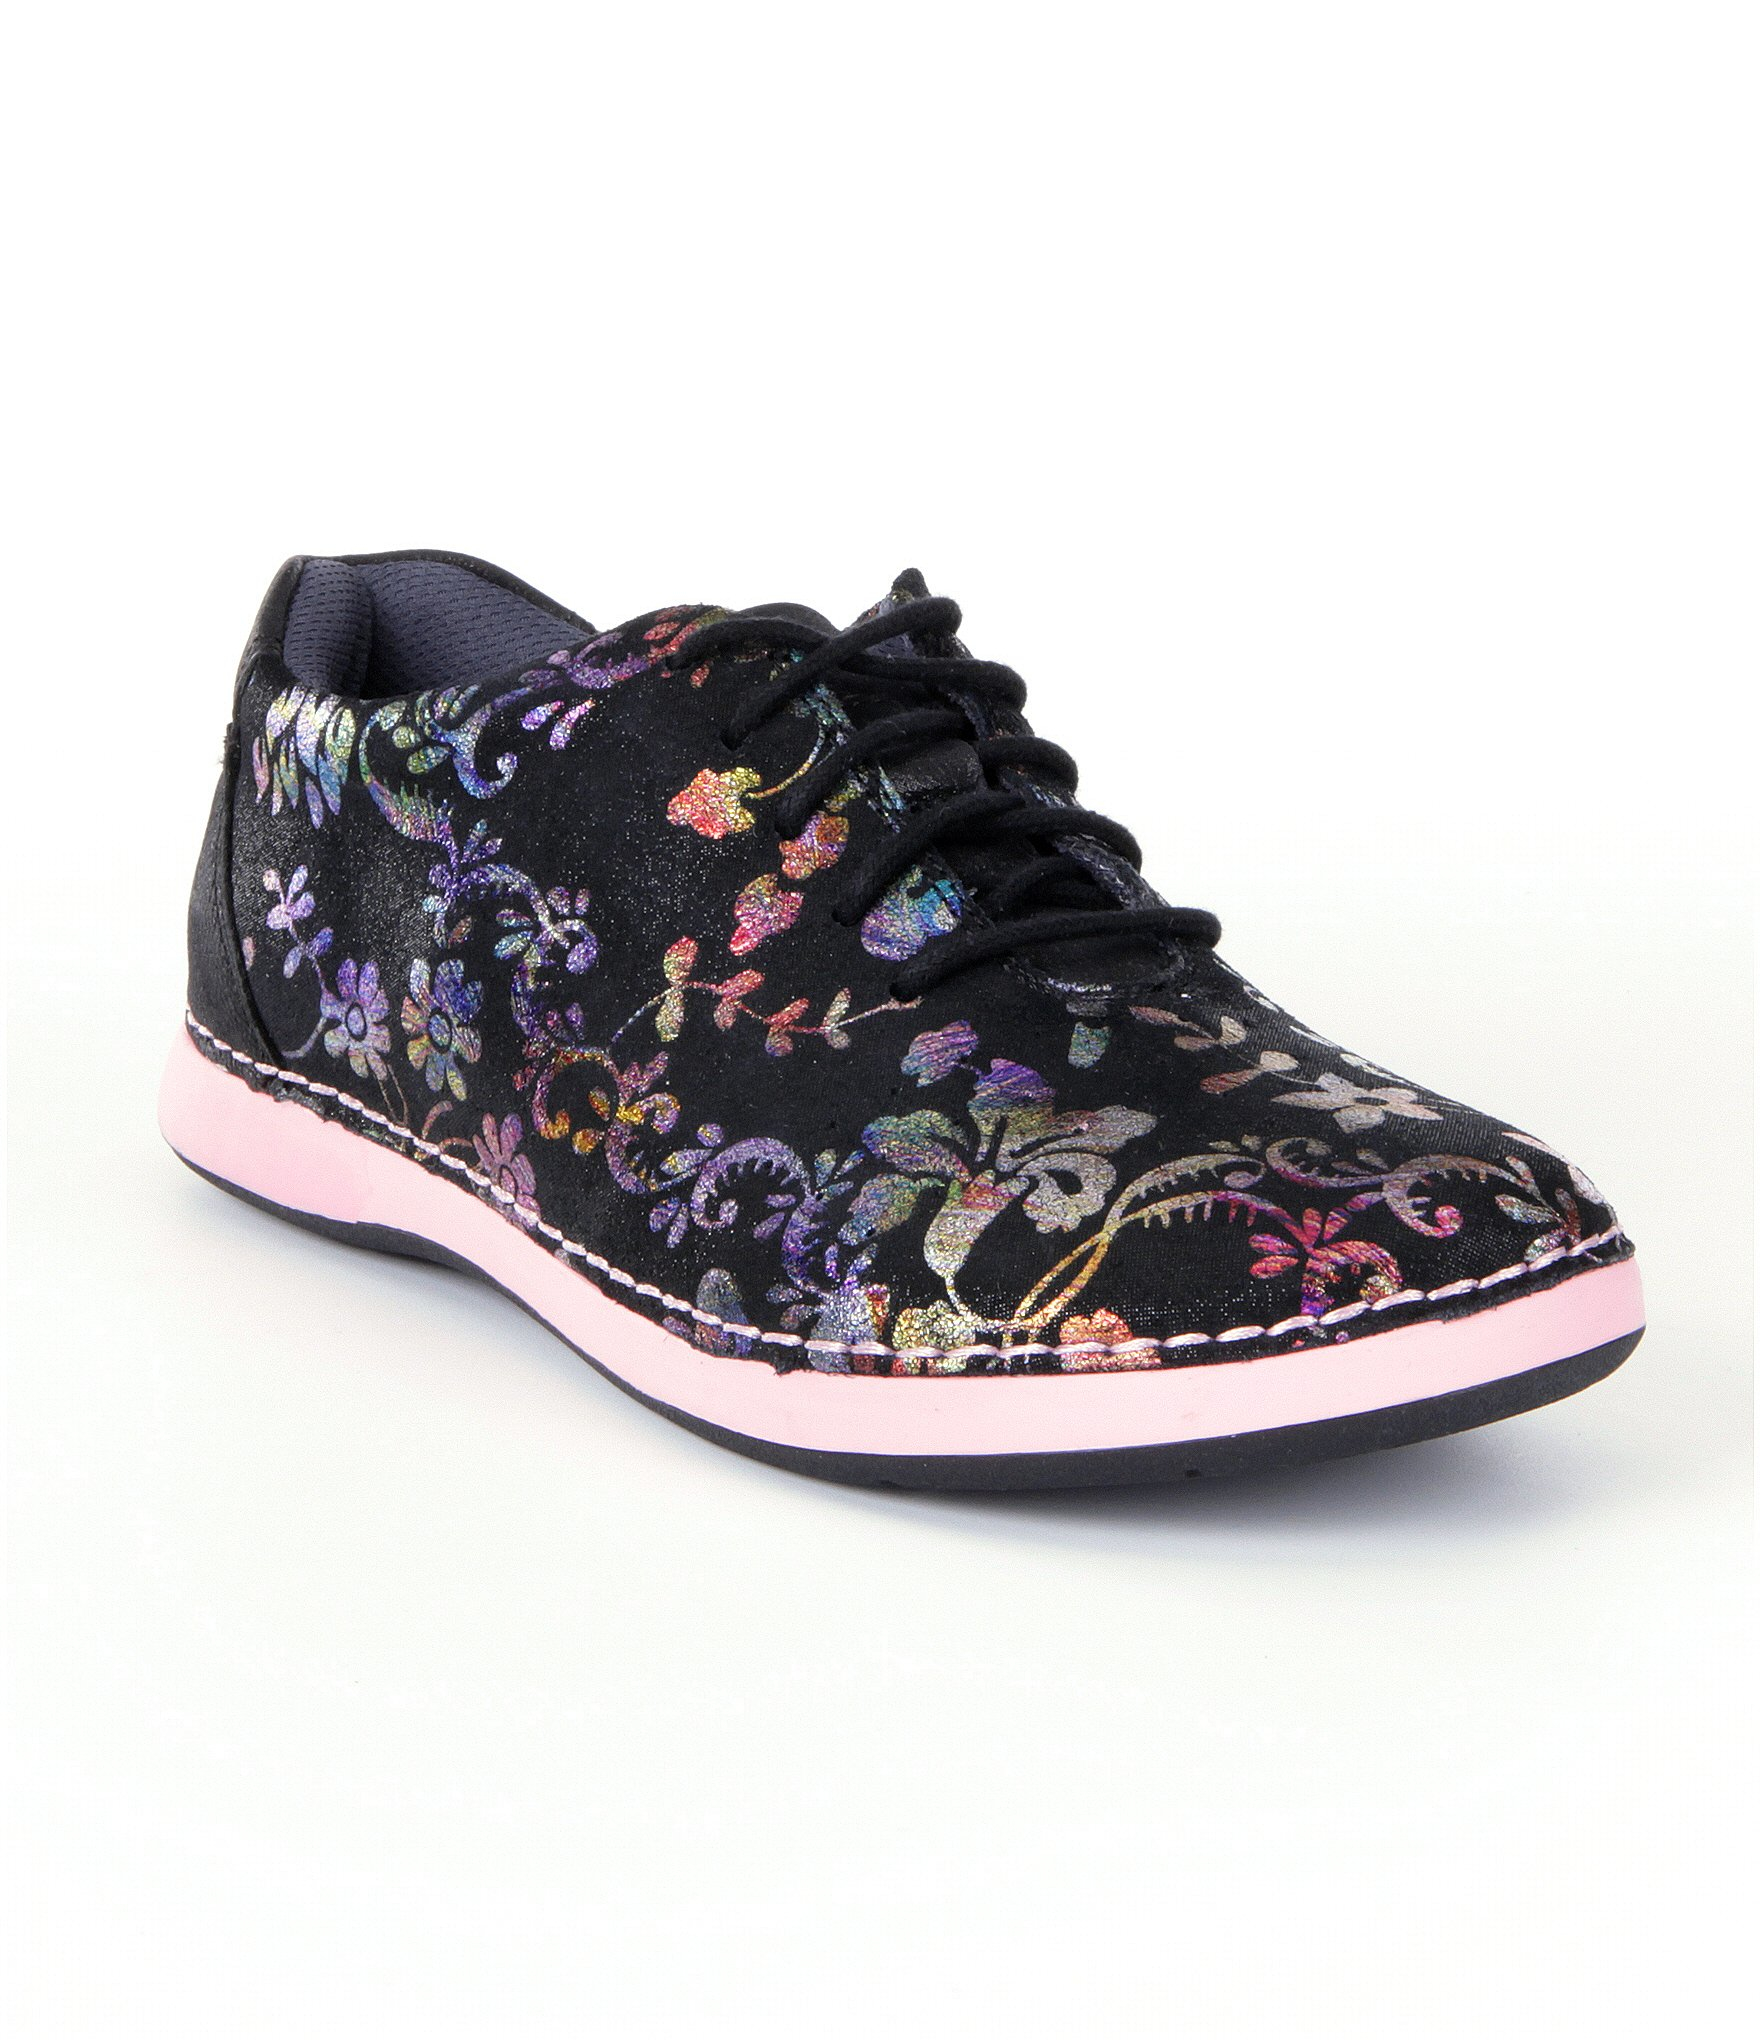 Lyst - Alegria Essence Lace-up Leather Walking Shoes in Black